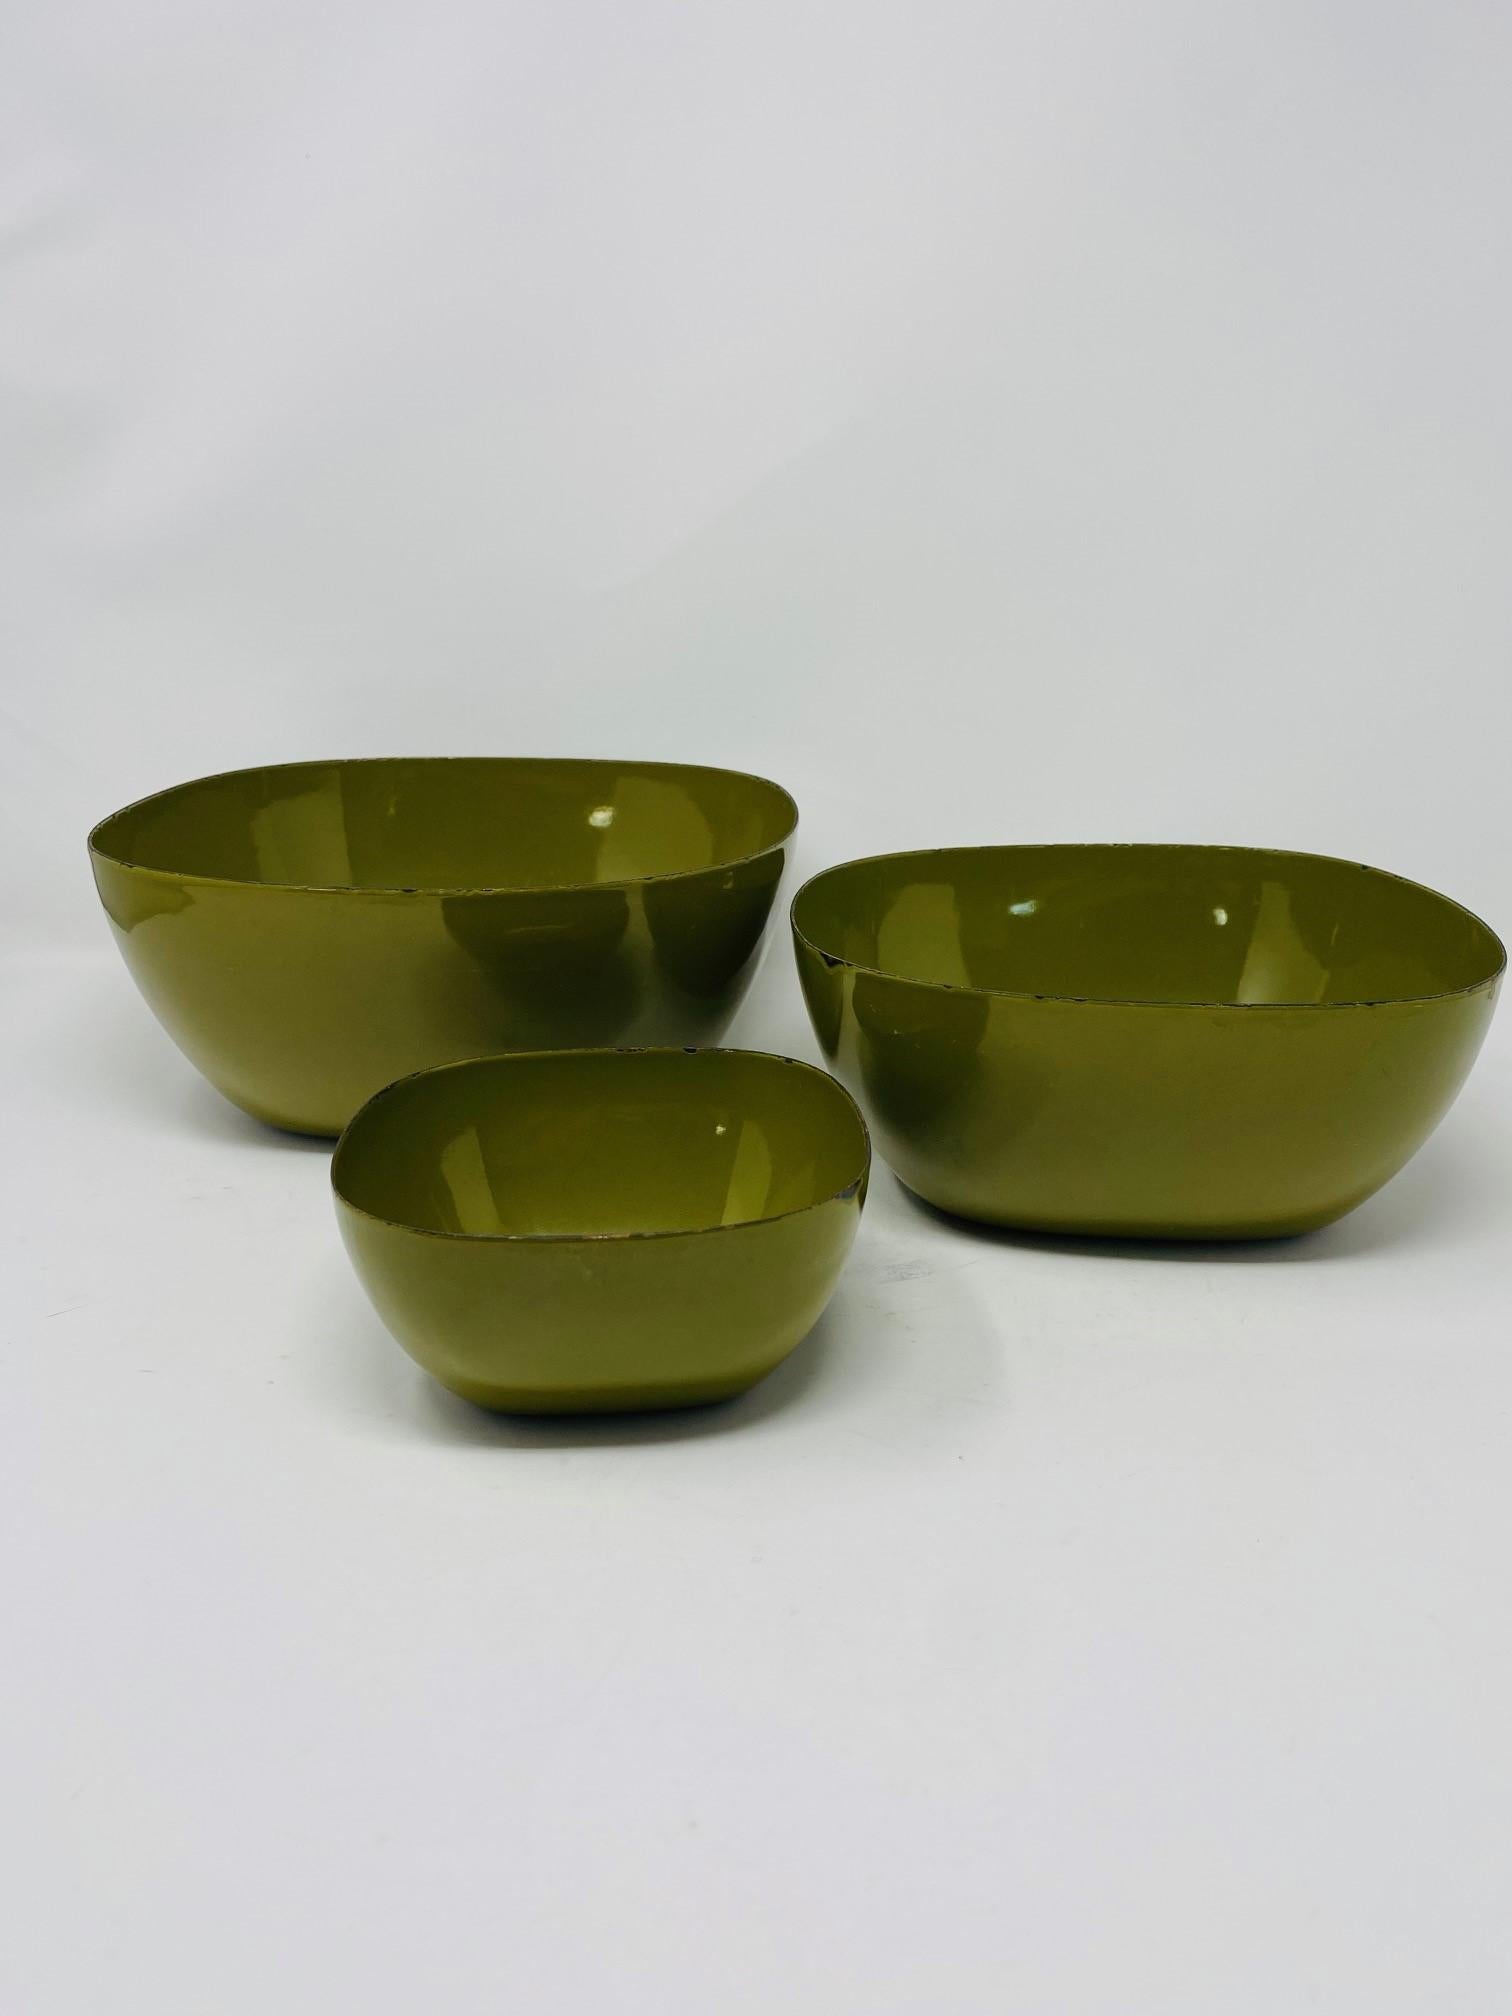 Mid-20th Century Mid Century Vintage Cathrineholm Enamelware Nesting Bowls Set of 3 Holland For Sale